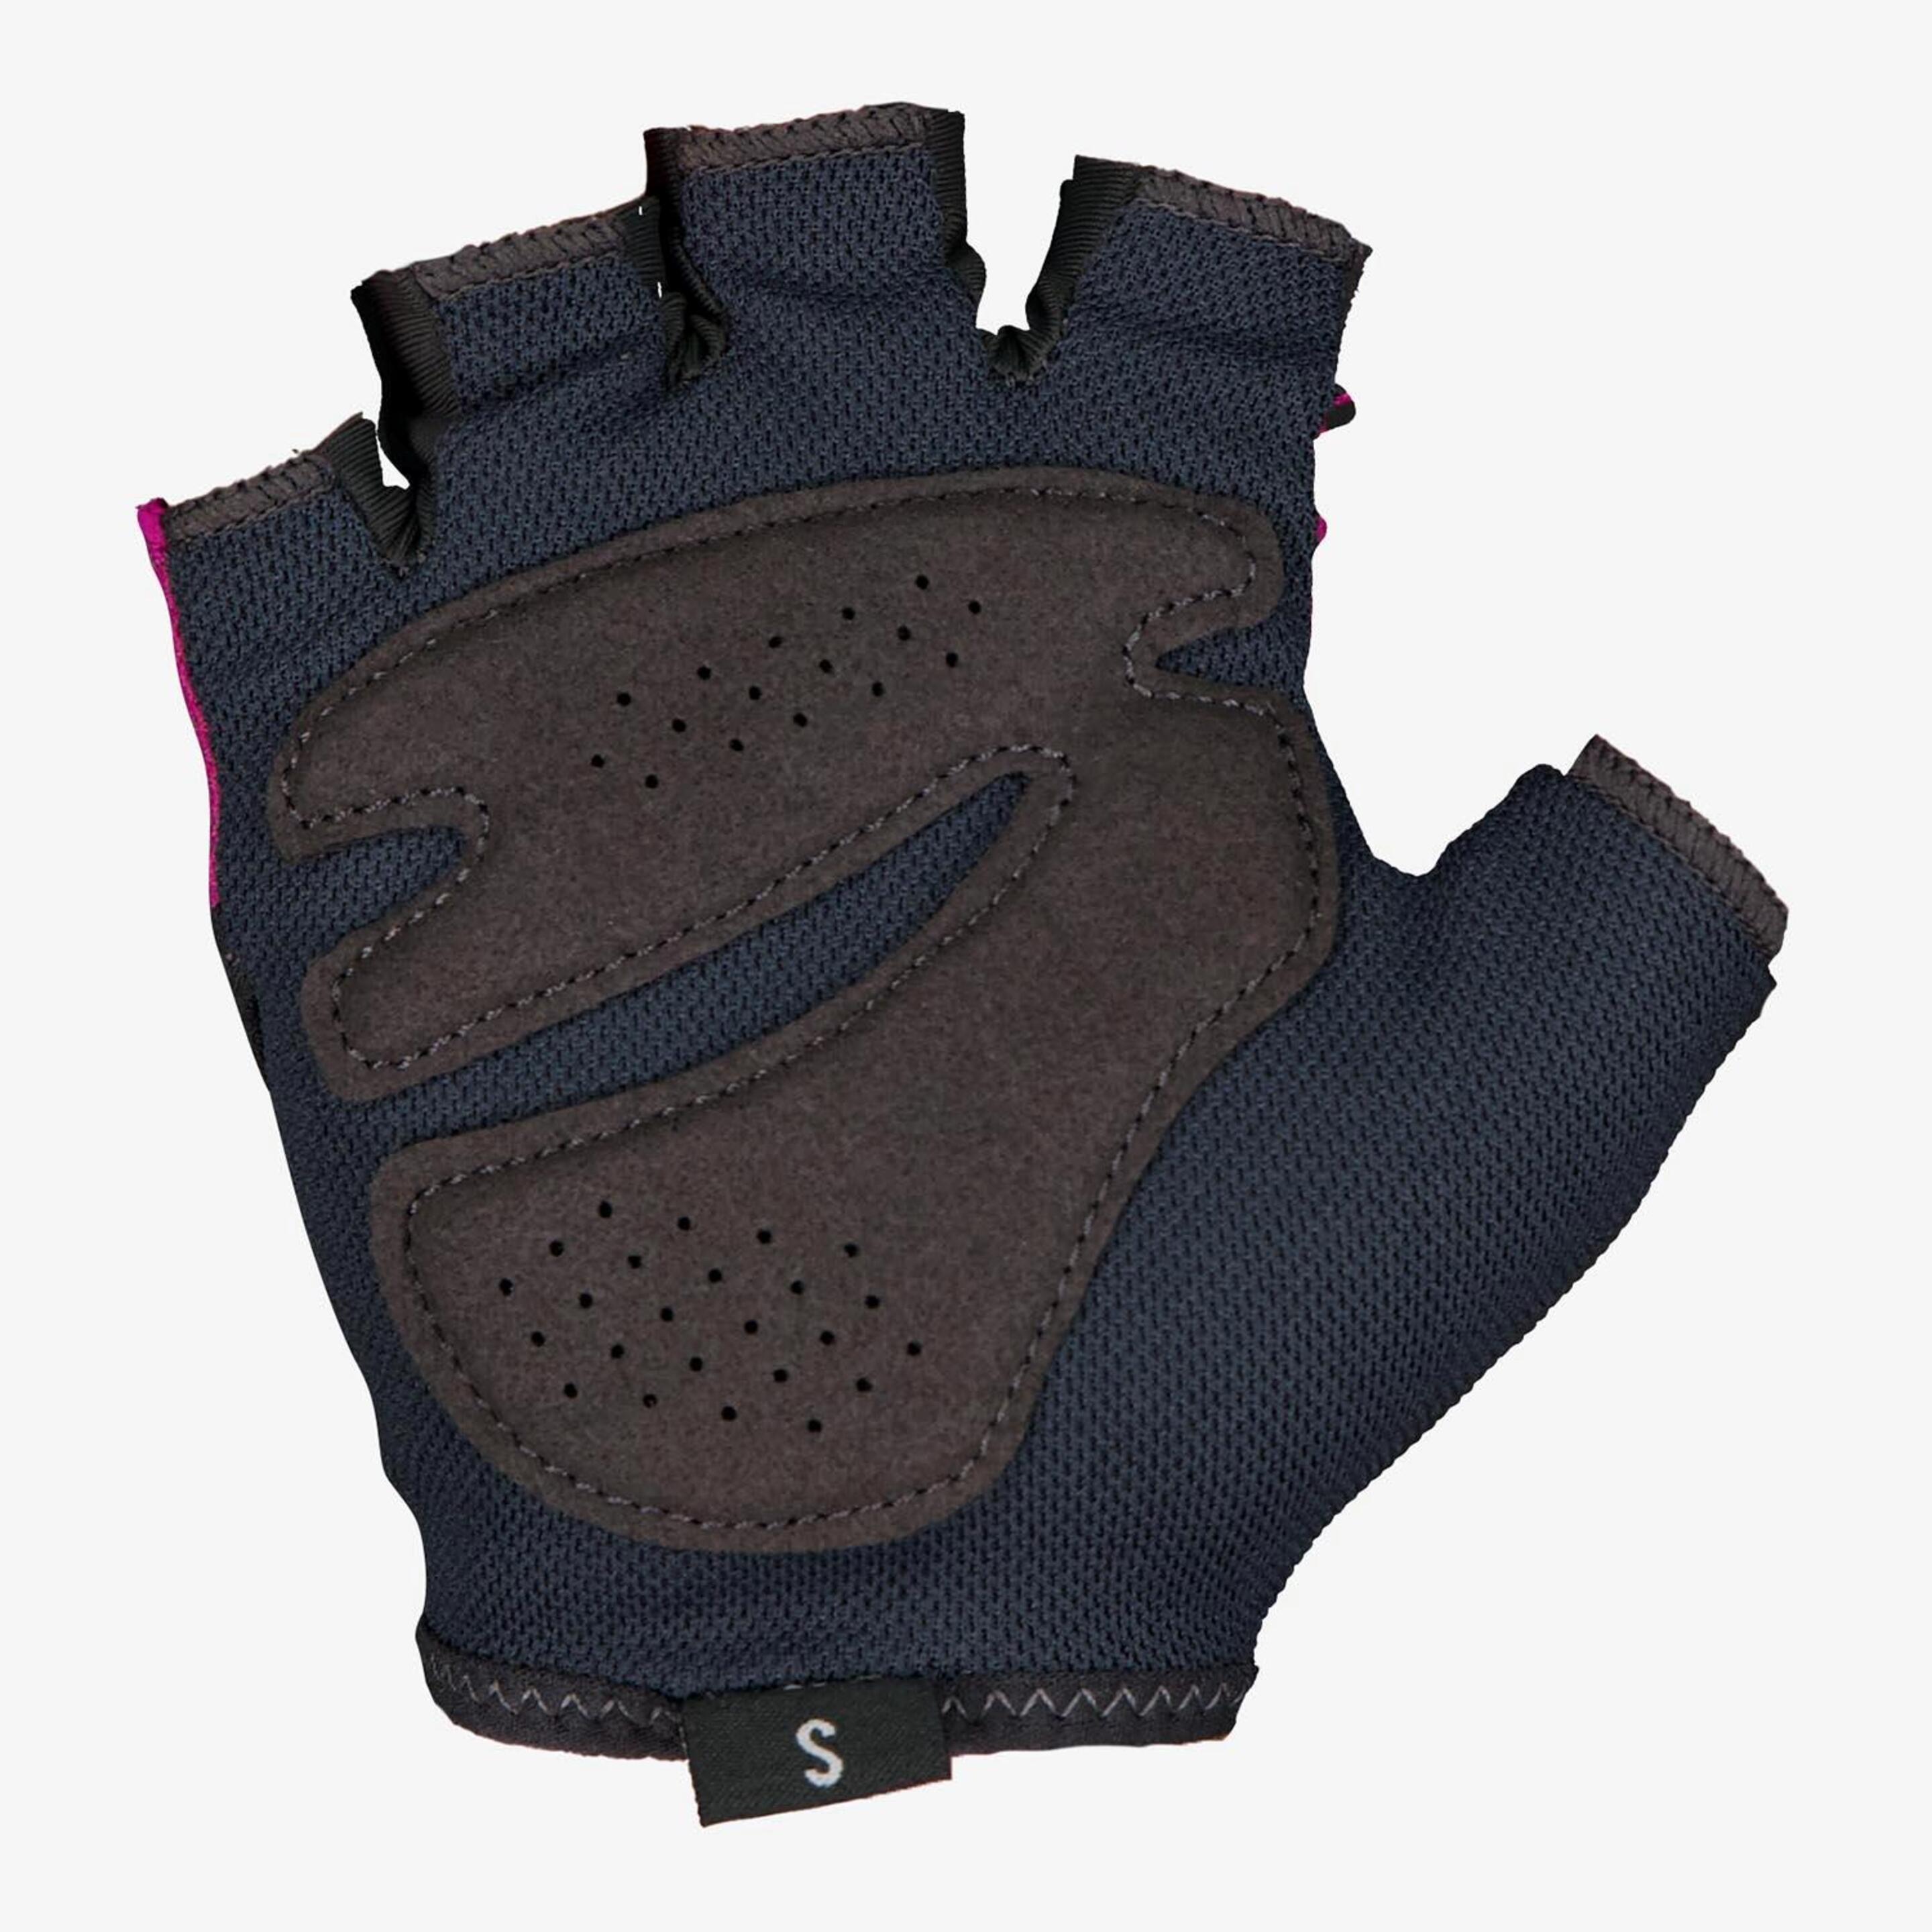 Nike Essential - Rosa - Guantes Mujer